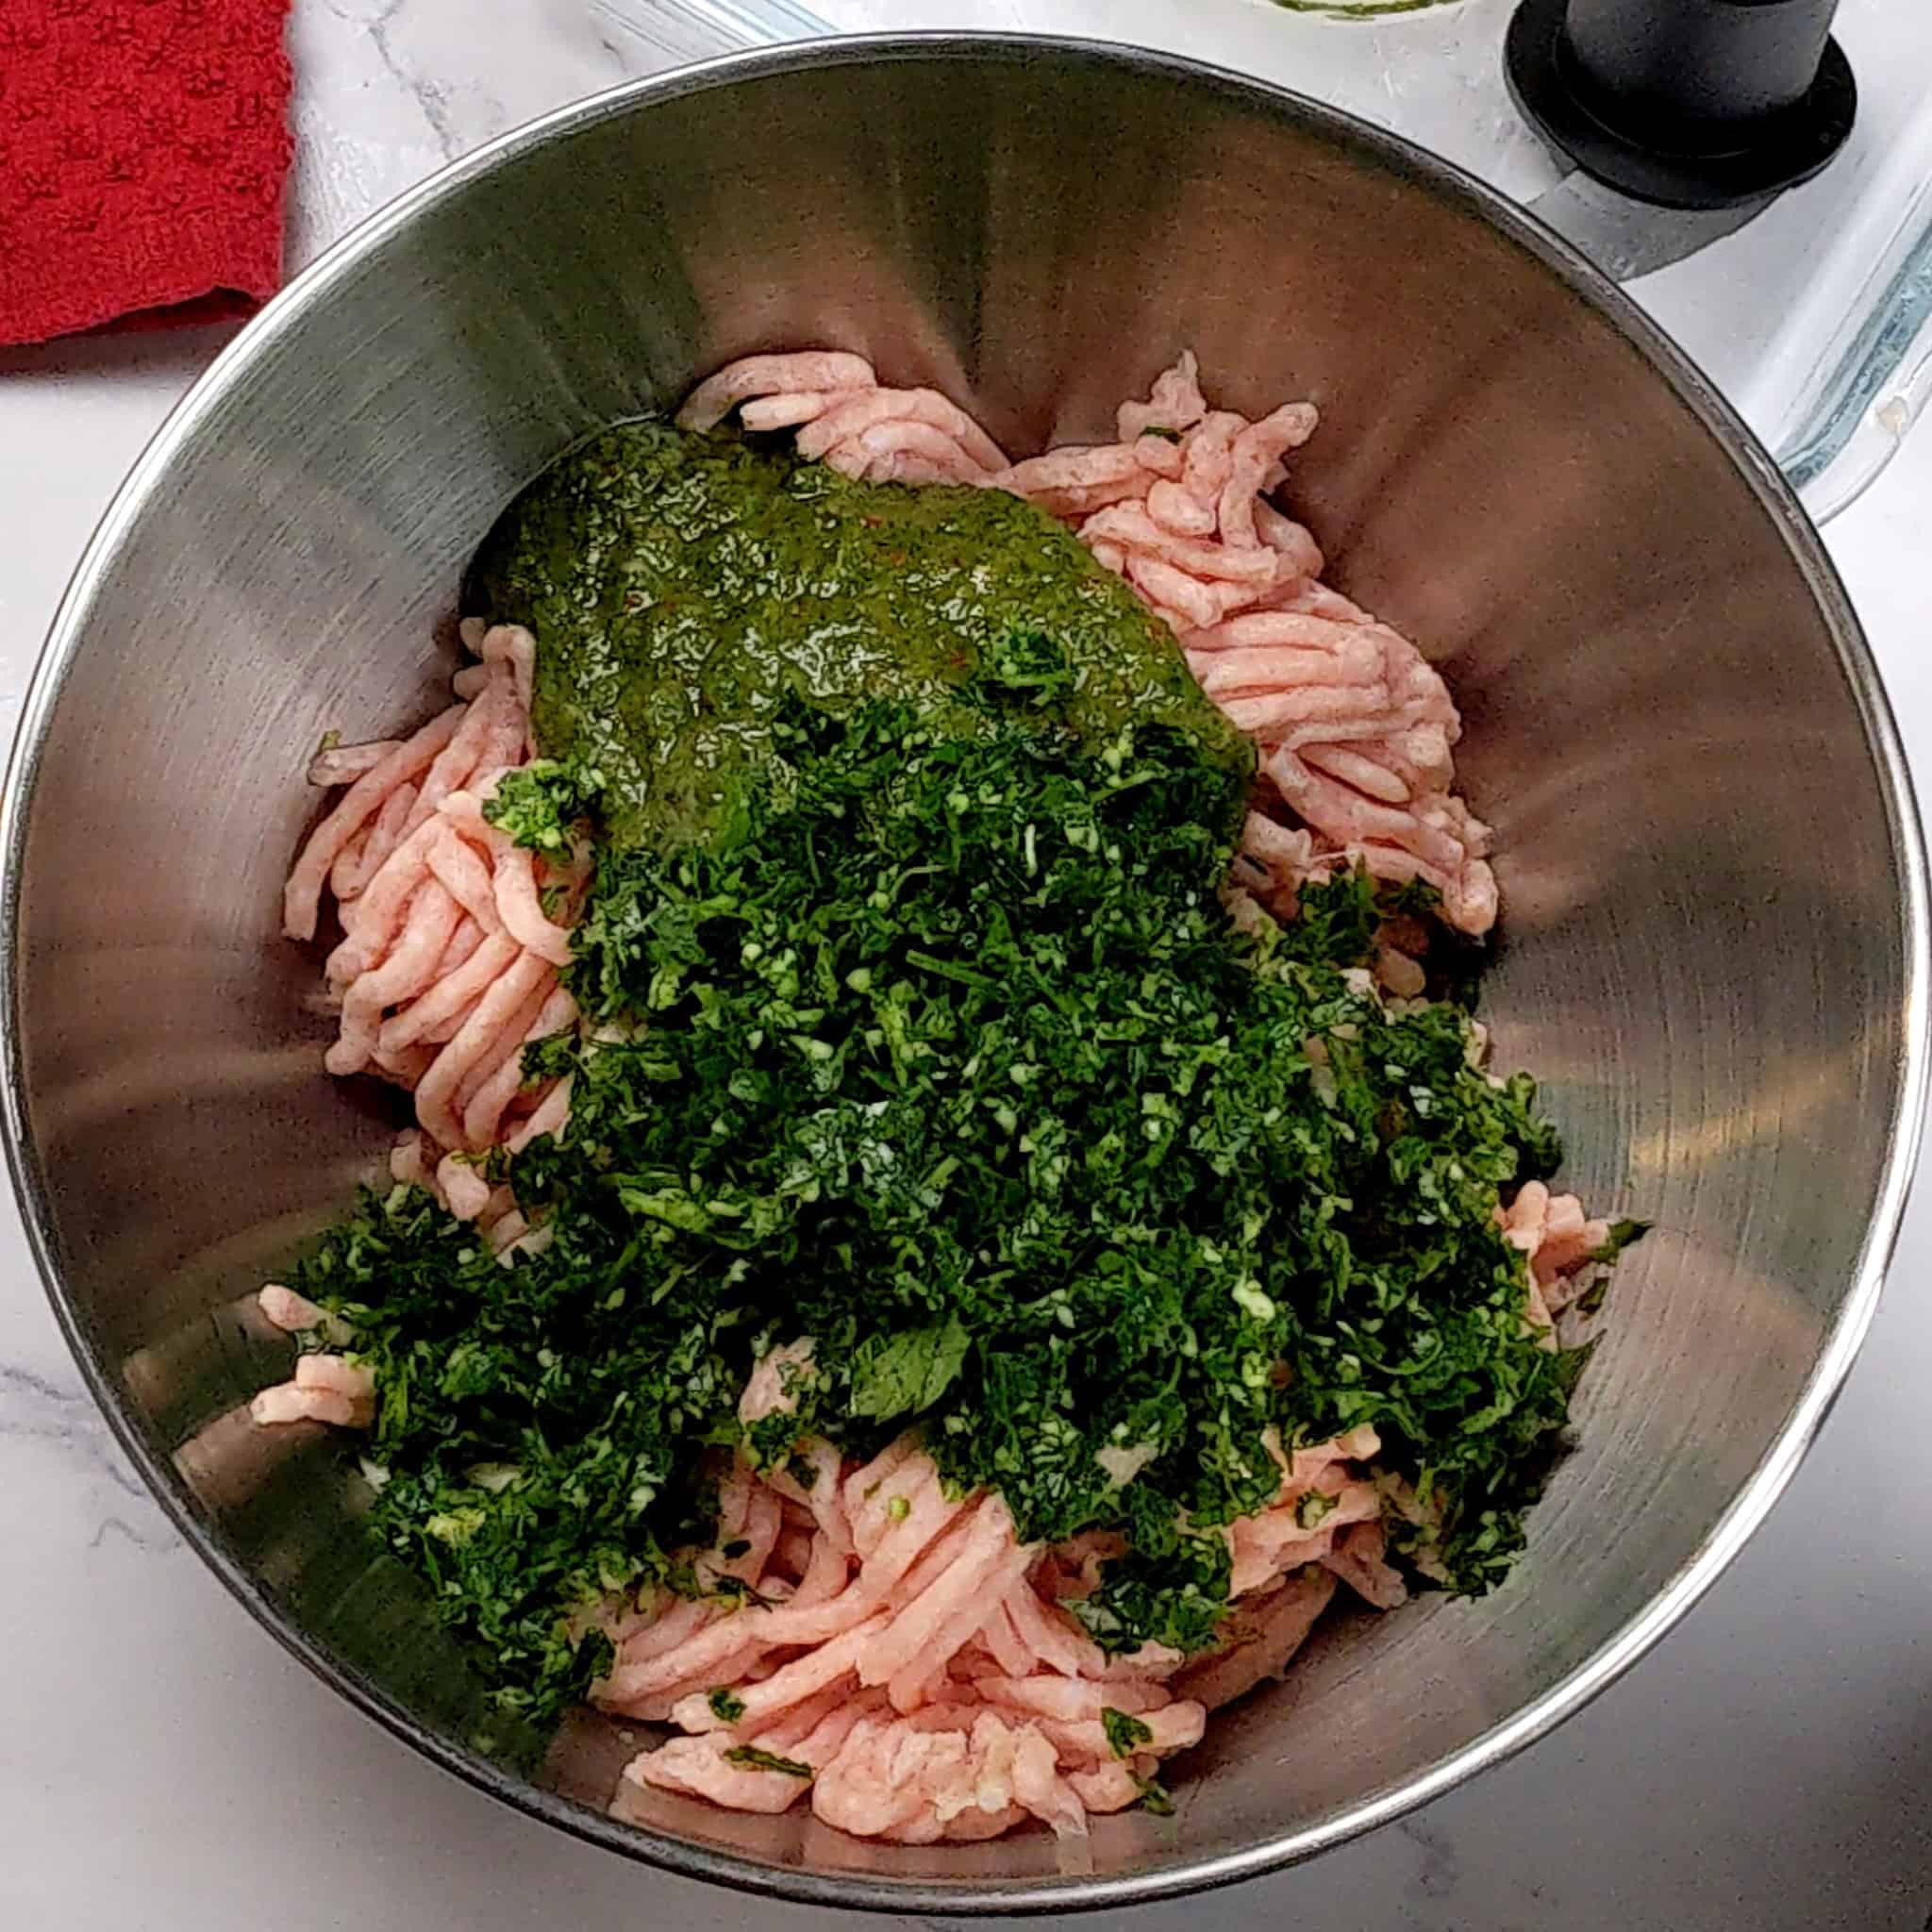 store bought ground chicken with zhug, and an aromatic paste of parsley, shallots and garlic in a stainless steel mixing bowl.